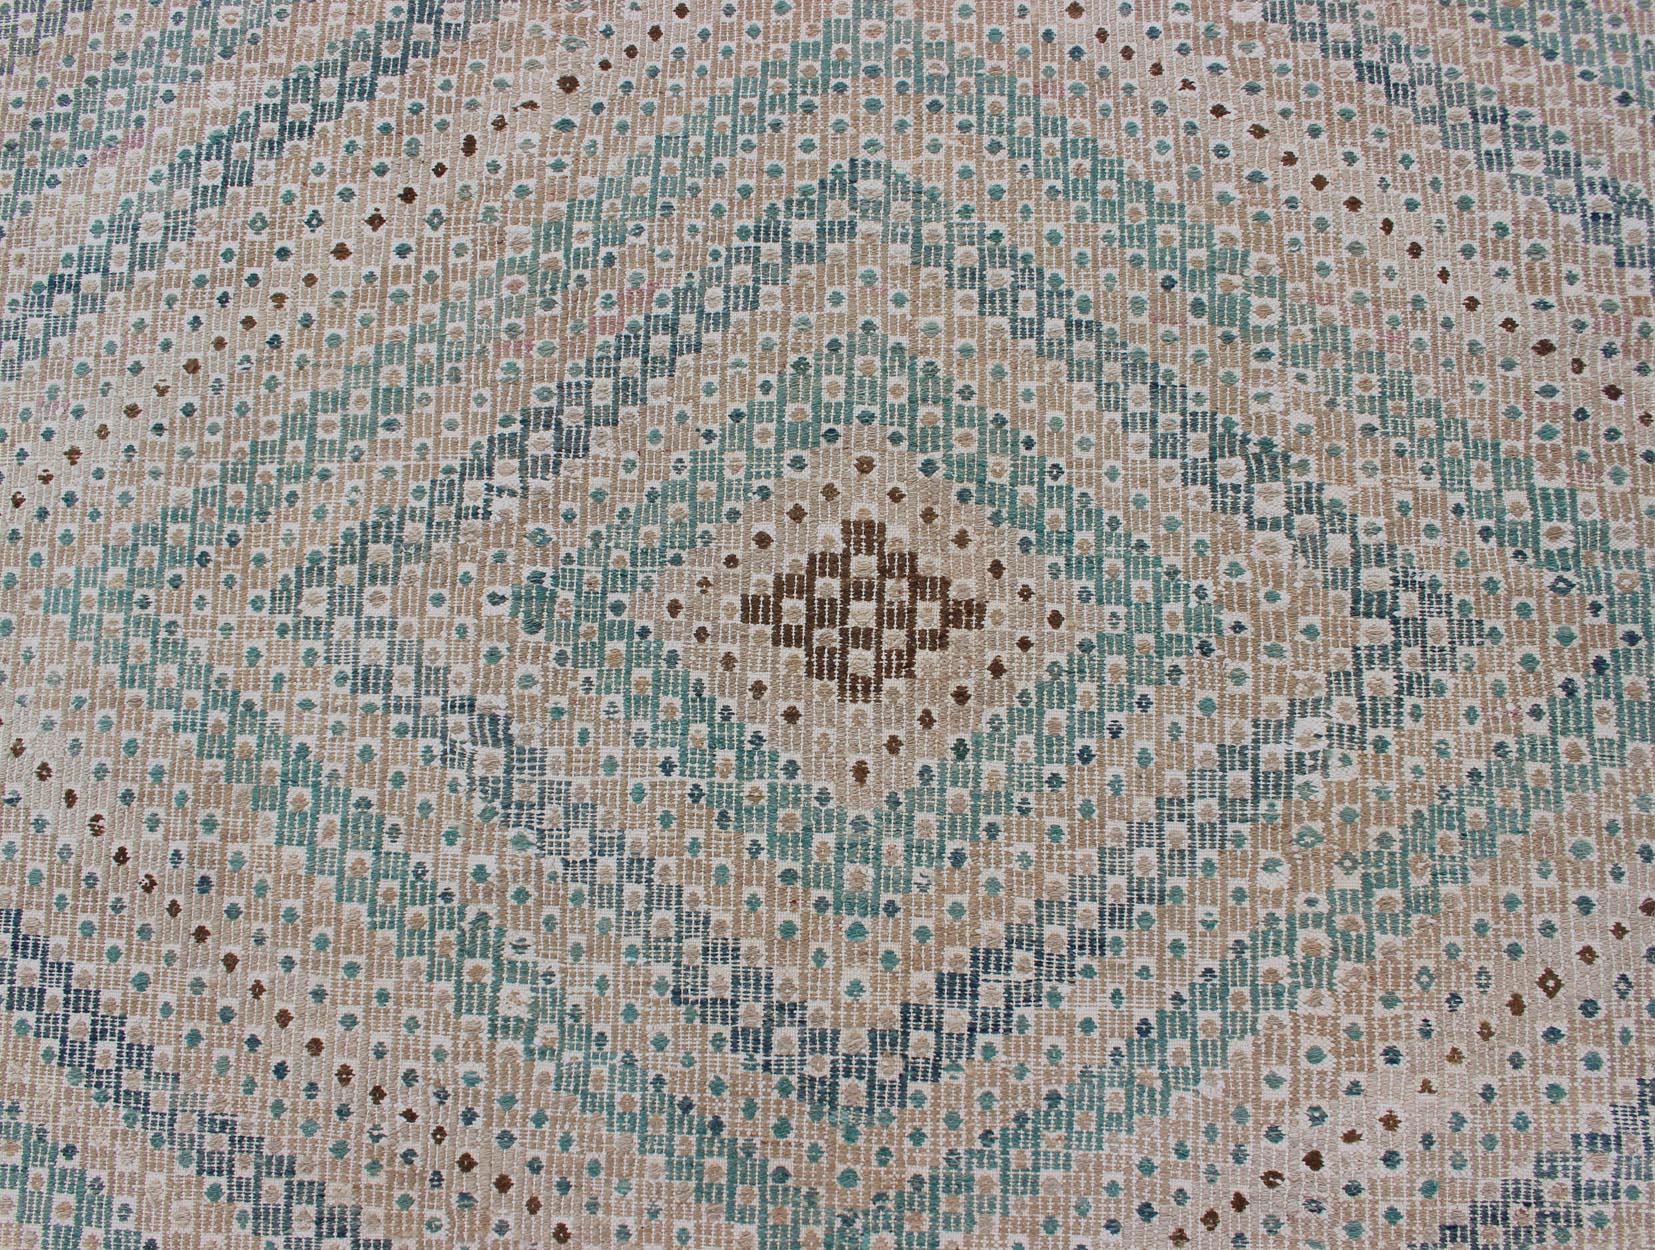 Diamond Design Vintage Turkish Embroidered Kilim in Tan, Blue, and Light Green In Good Condition For Sale In Atlanta, GA